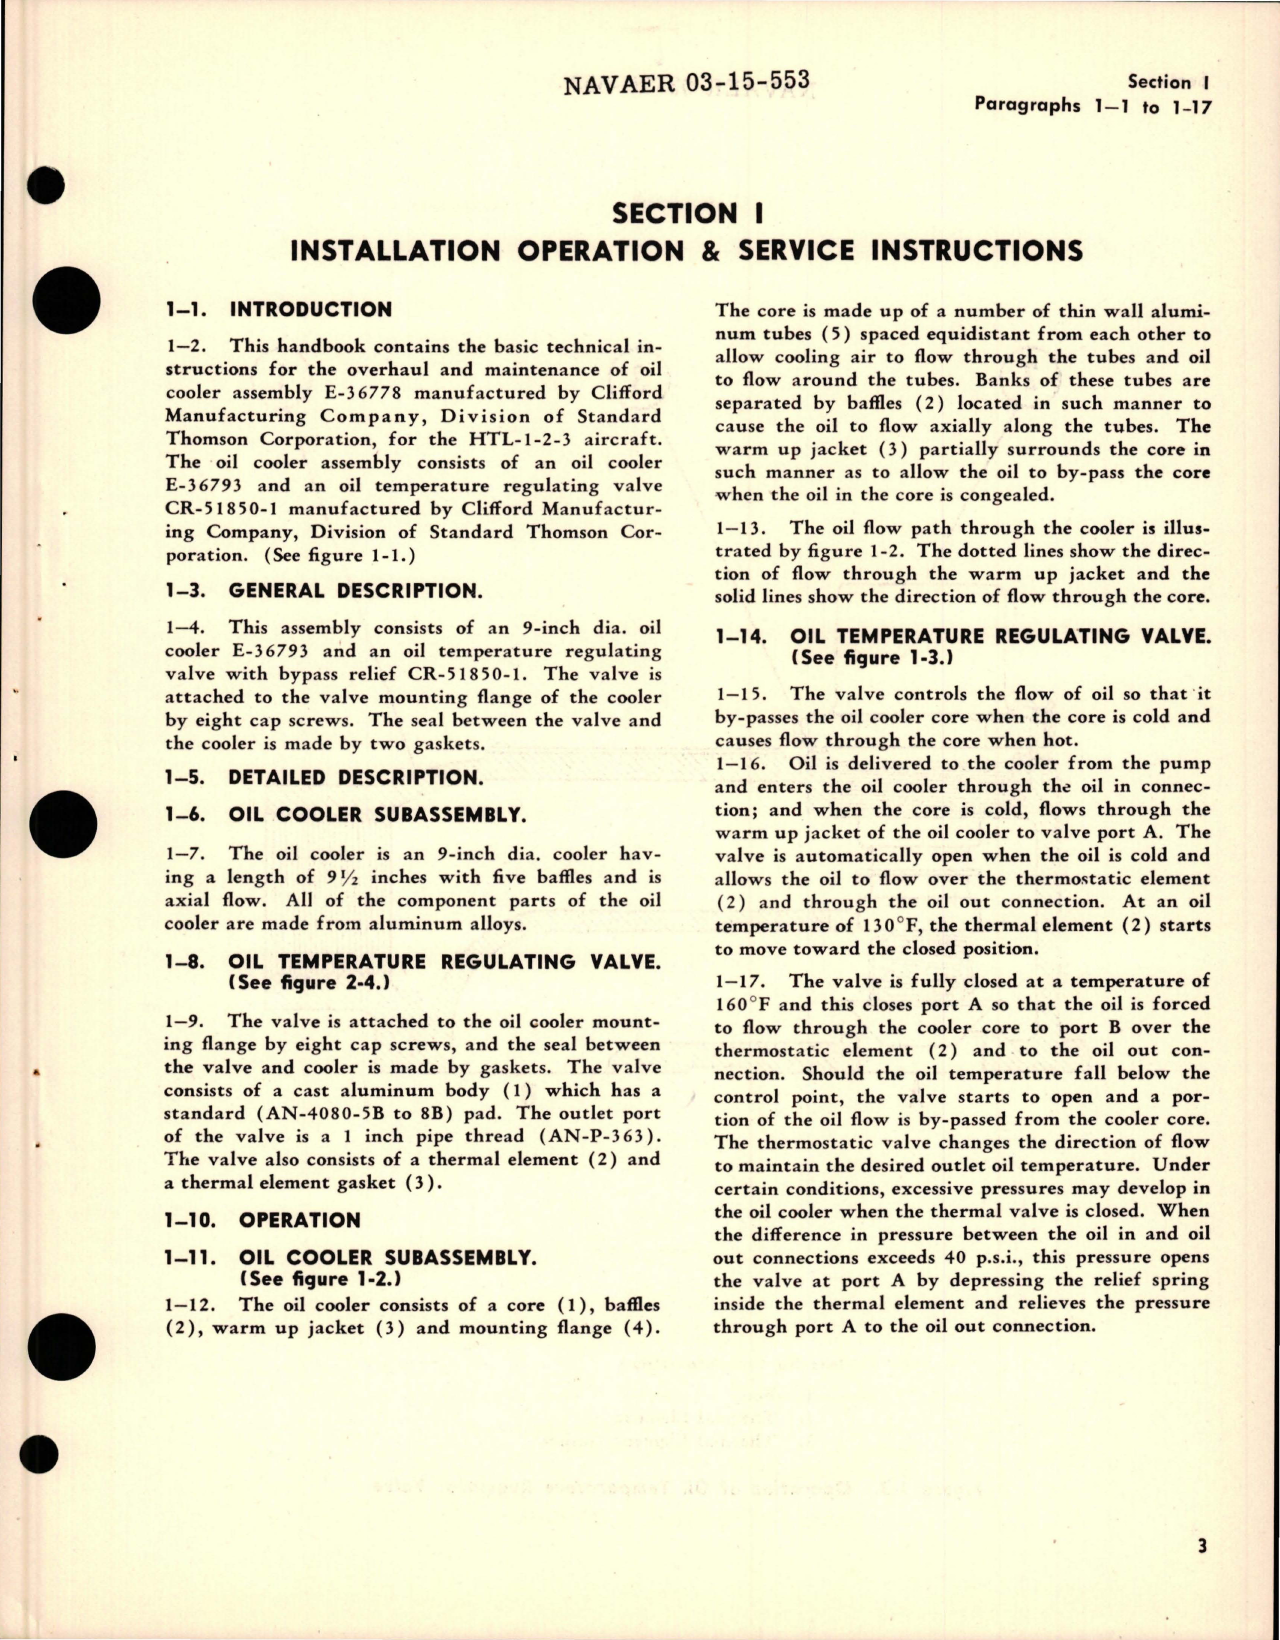 Sample page 5 from AirCorps Library document: Operation, Service, Overhaul Instructions with Parts Catalog for Oil Cooler Assembly - Model E-36778